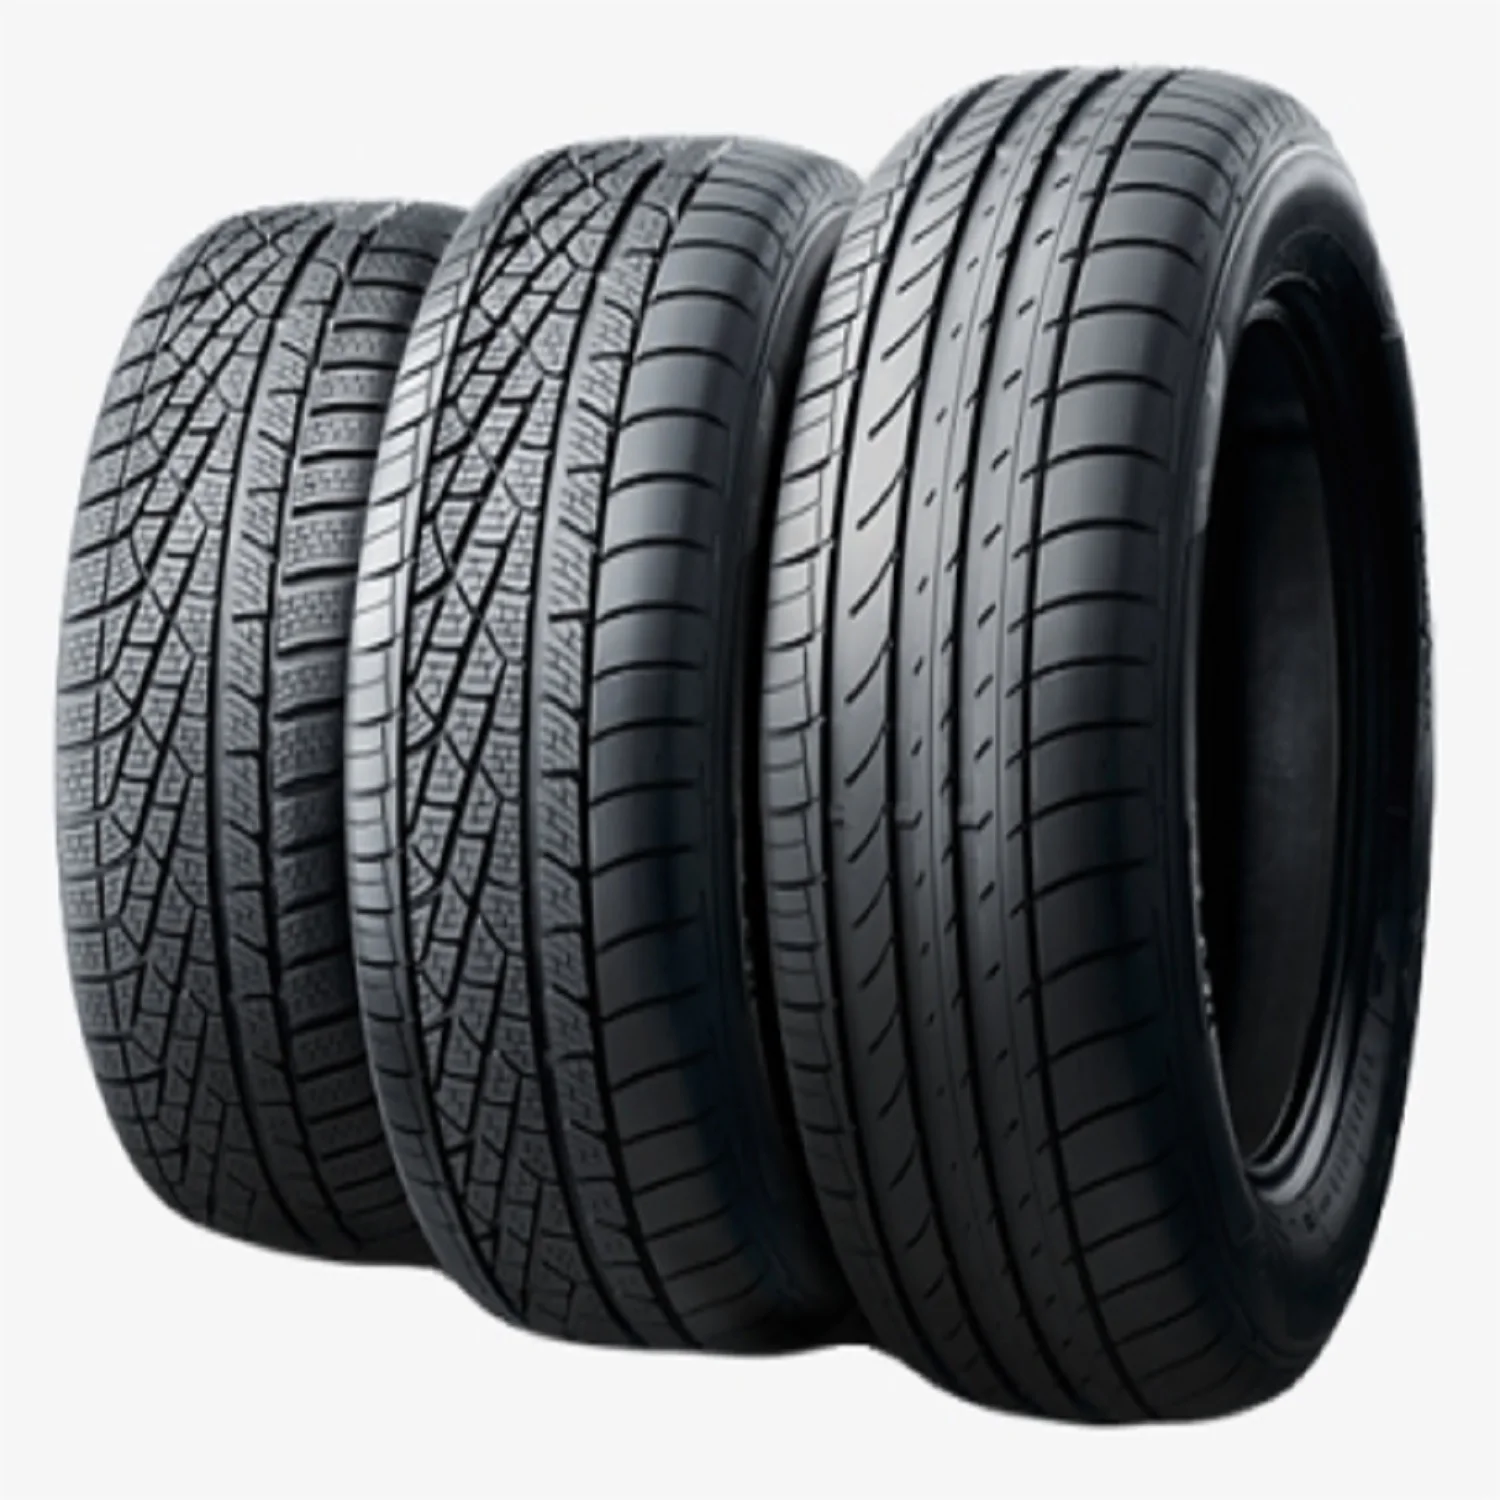 Used tires, Second Hand Tires, Perfect Used Car Tires In Bulk FOR SALE.